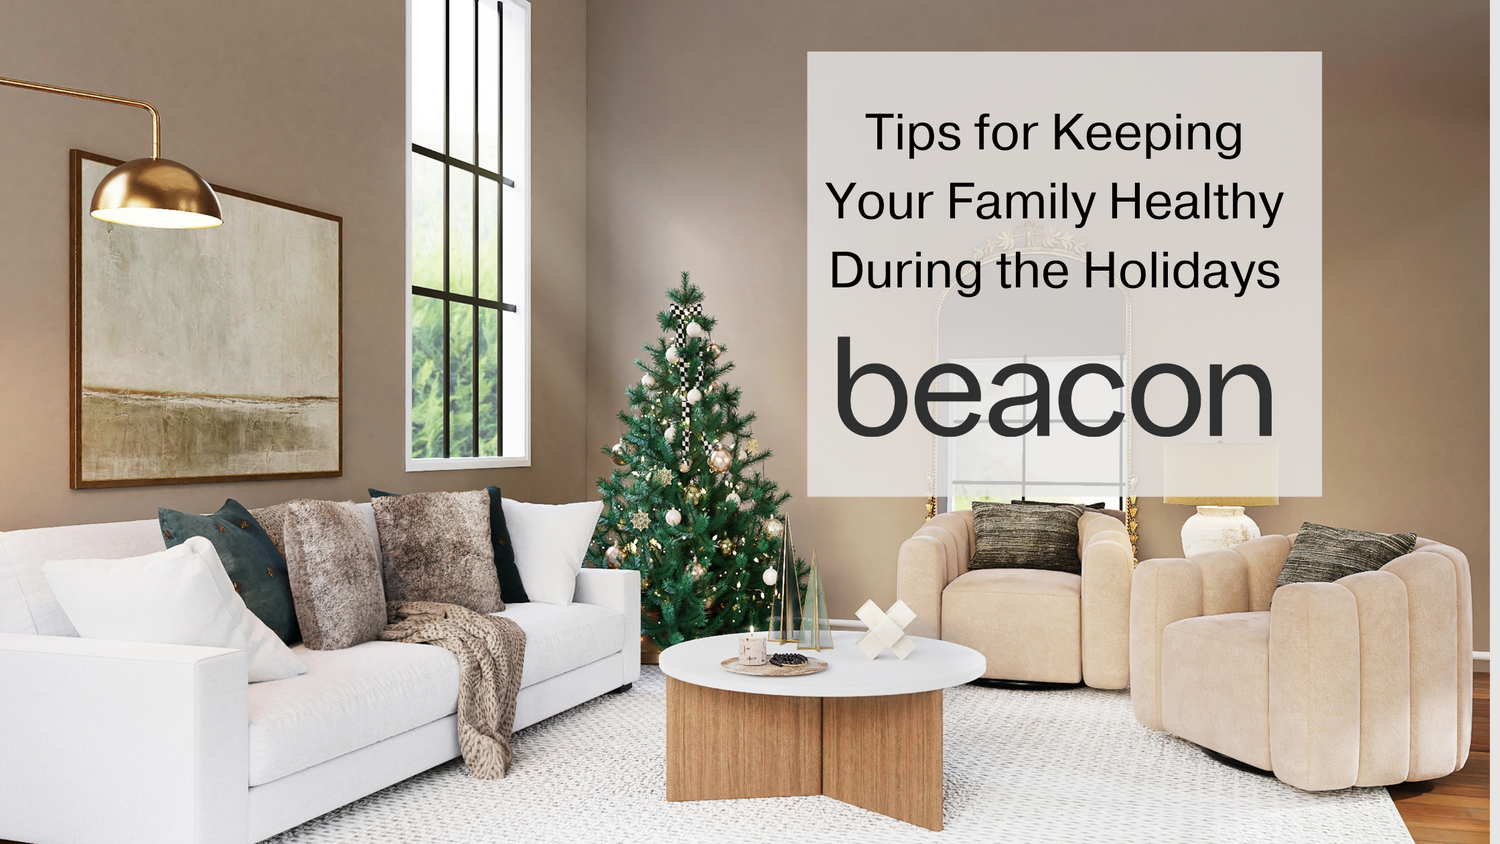 Tips for Keeping Your Family Healthy During the Holidays